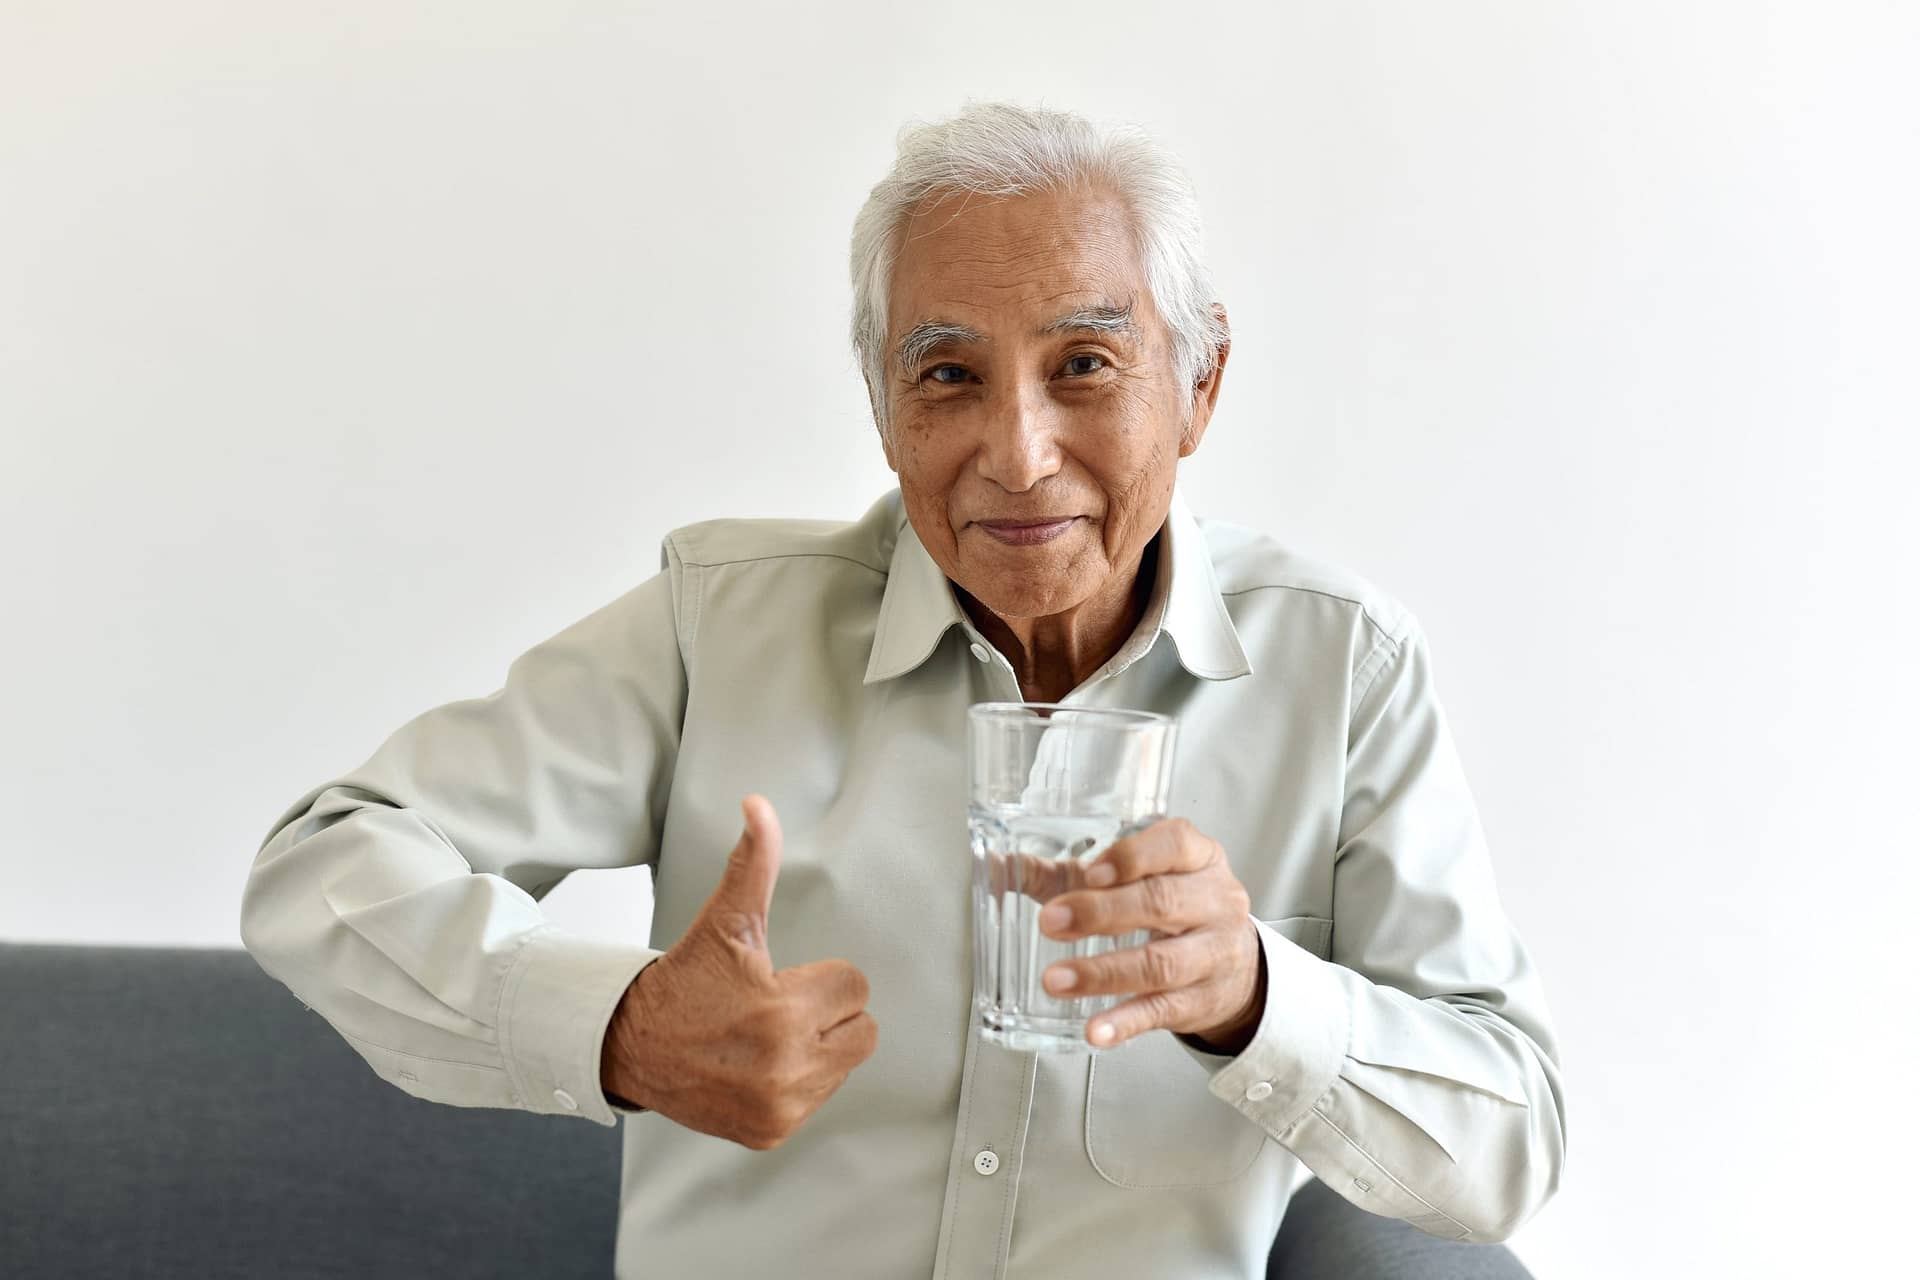 drinking water is good healthy habit for old man 2022 11 09 14 58 40 utc min scaled